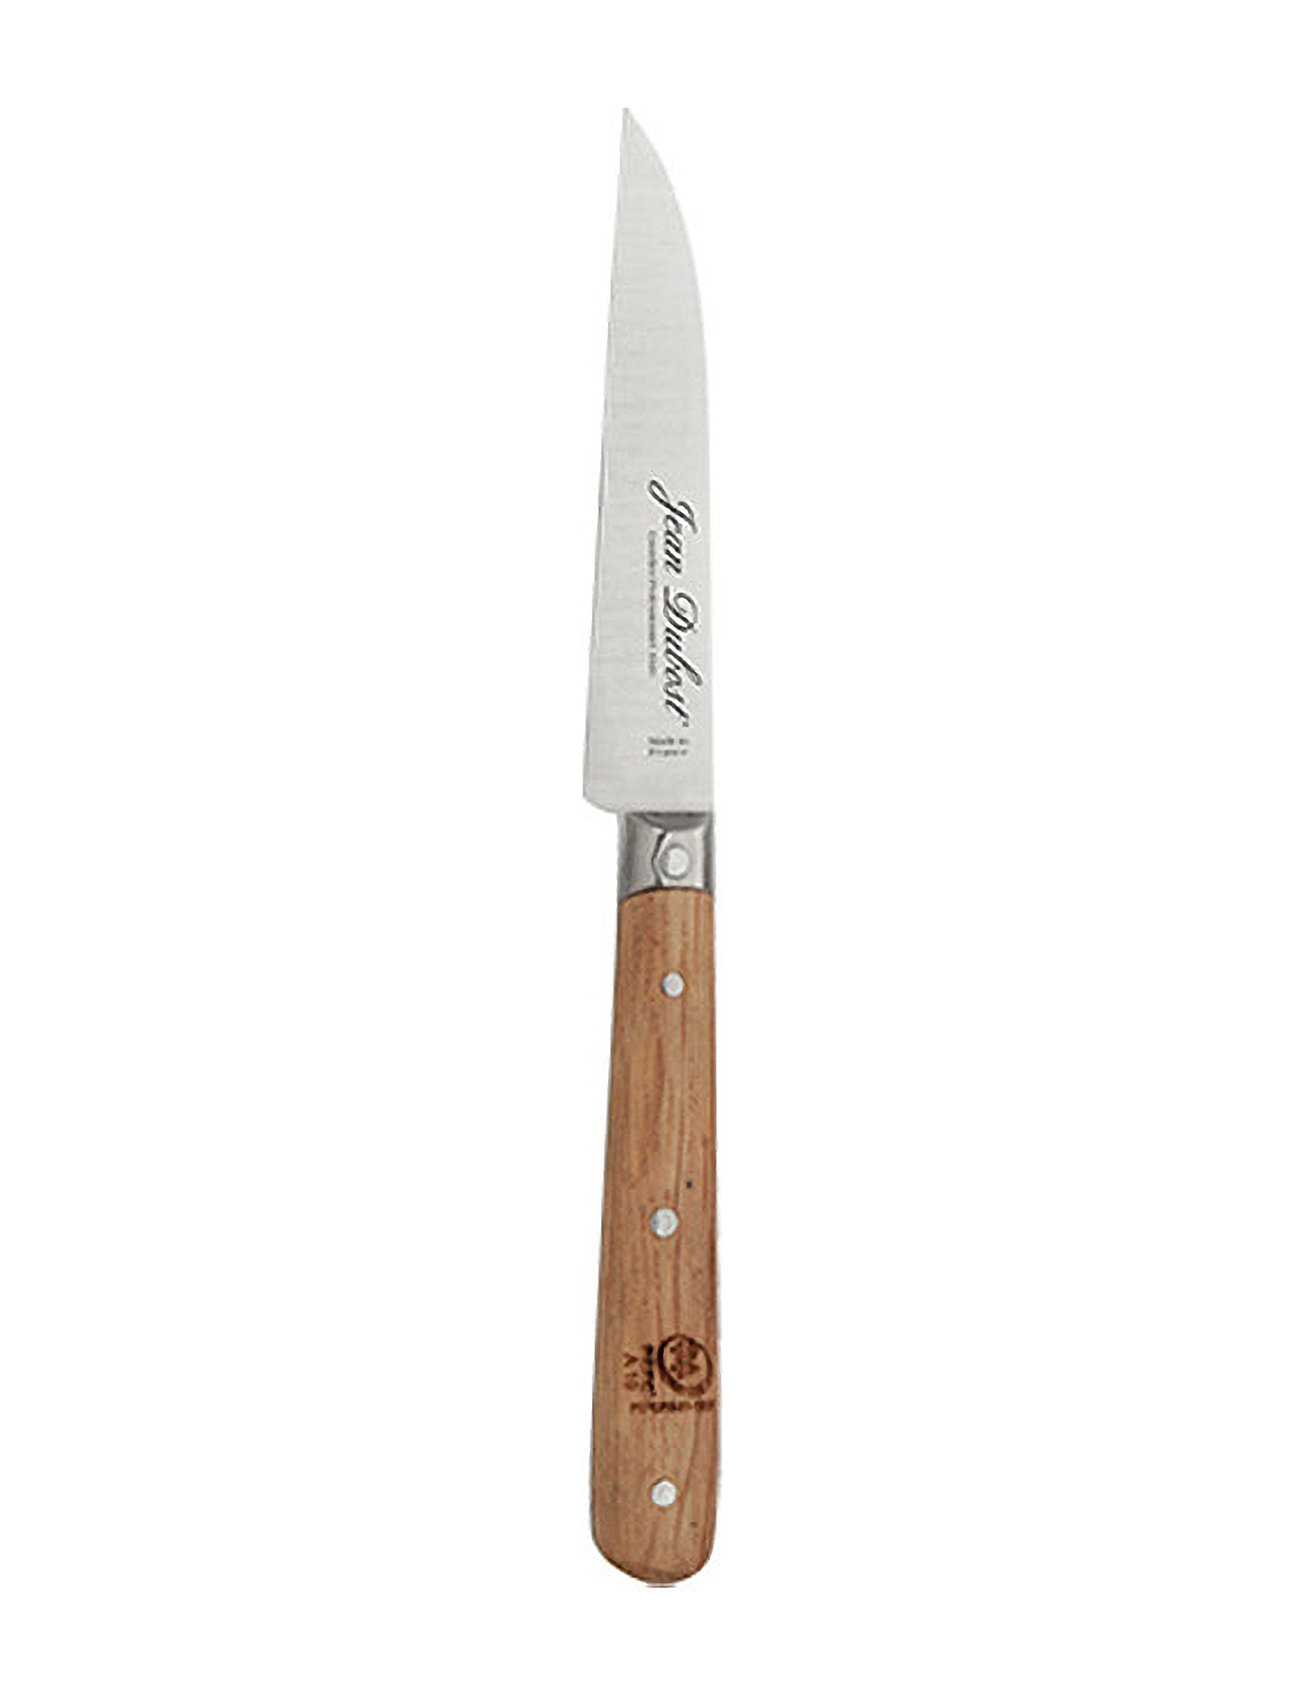 Kitchen knives Espace all stainless steel Pradel Jean Dubost